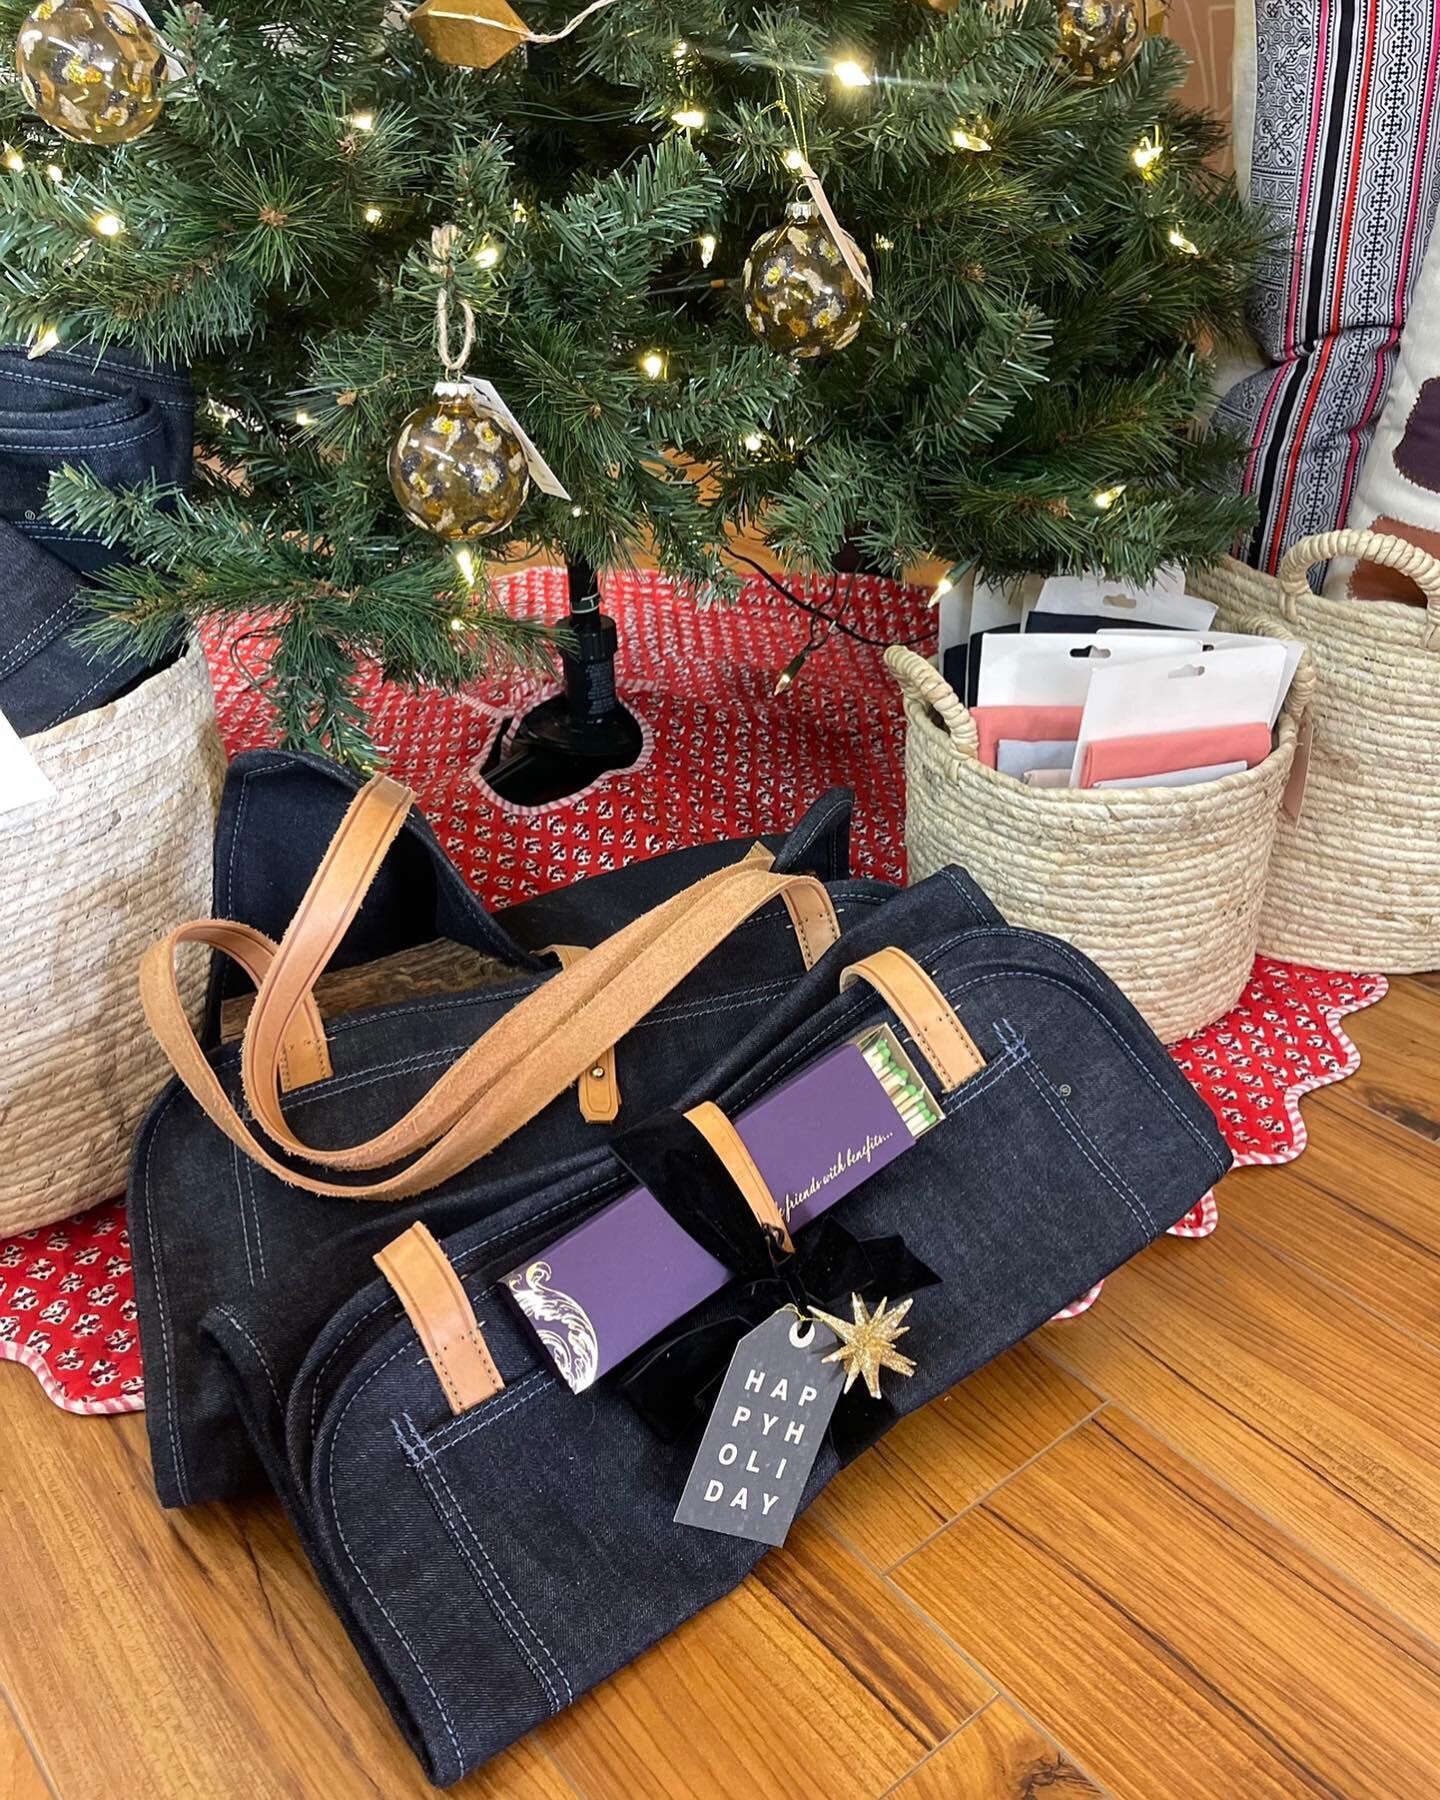 Feeling the cold snap? Kick off wood burning season in style with our log bags! 

Our Denim &amp; Leather Log Bag is available in a cozy pre-made gift set perfect for the winter season ✨🪵